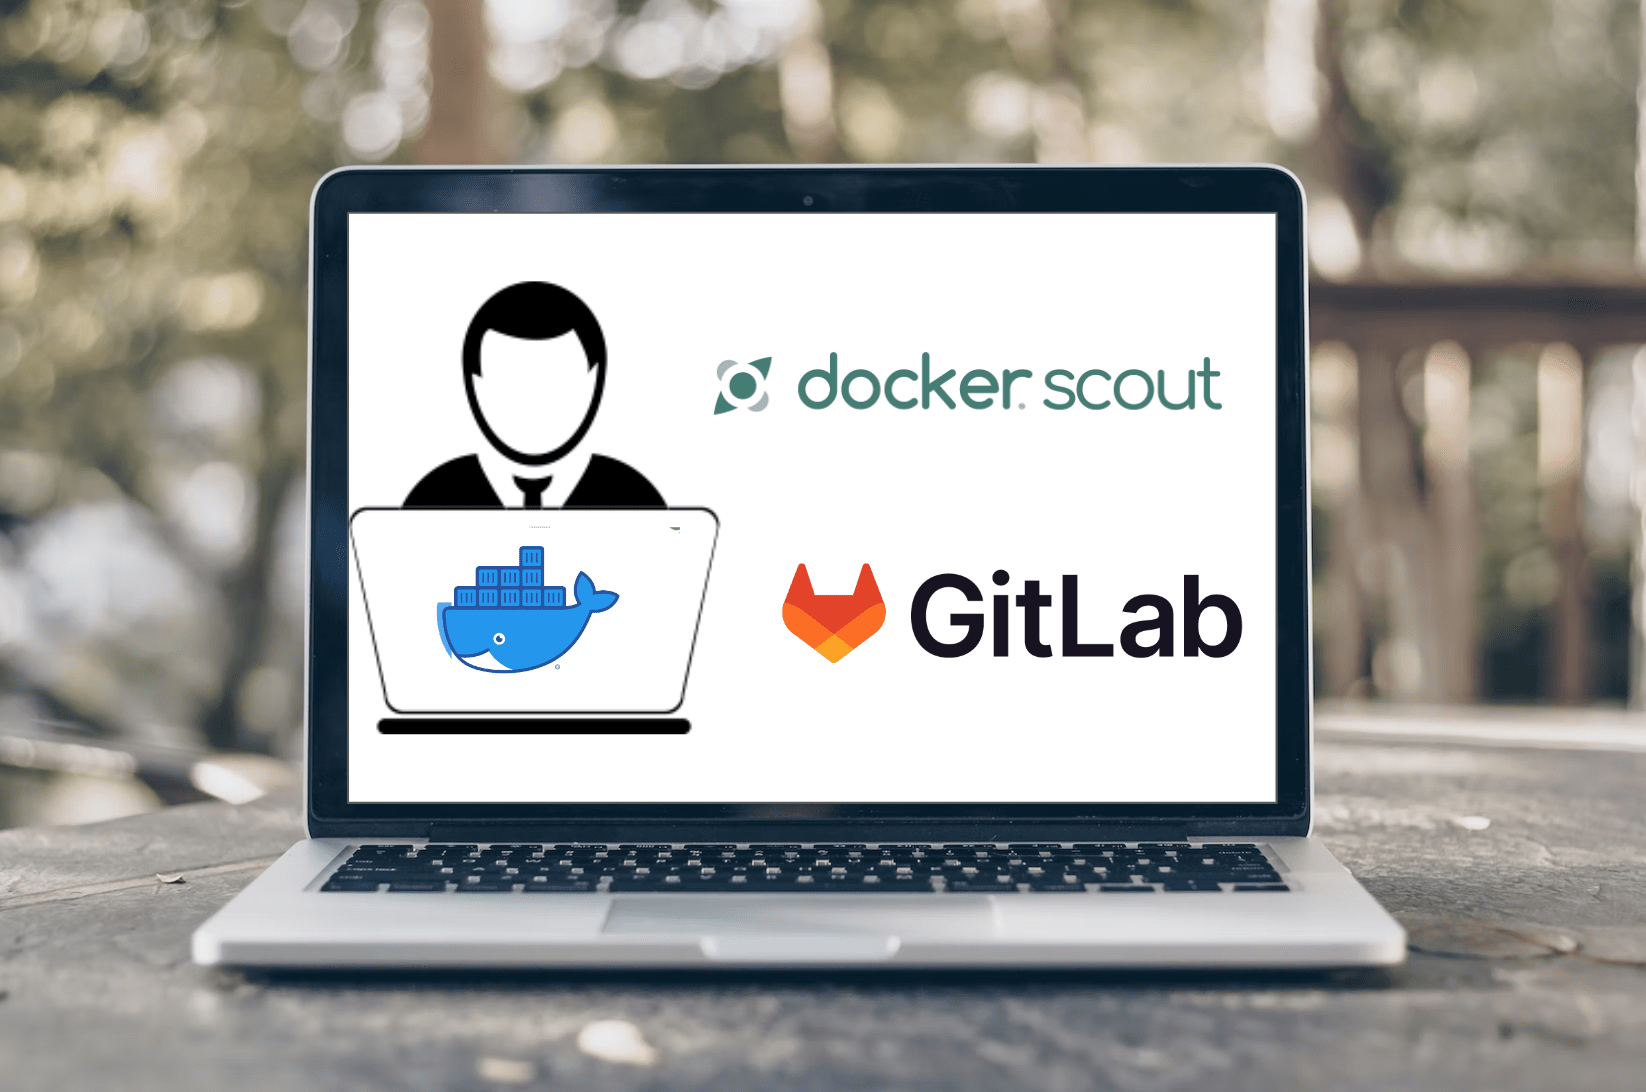 How to Integrate Docker Scout with GitLab